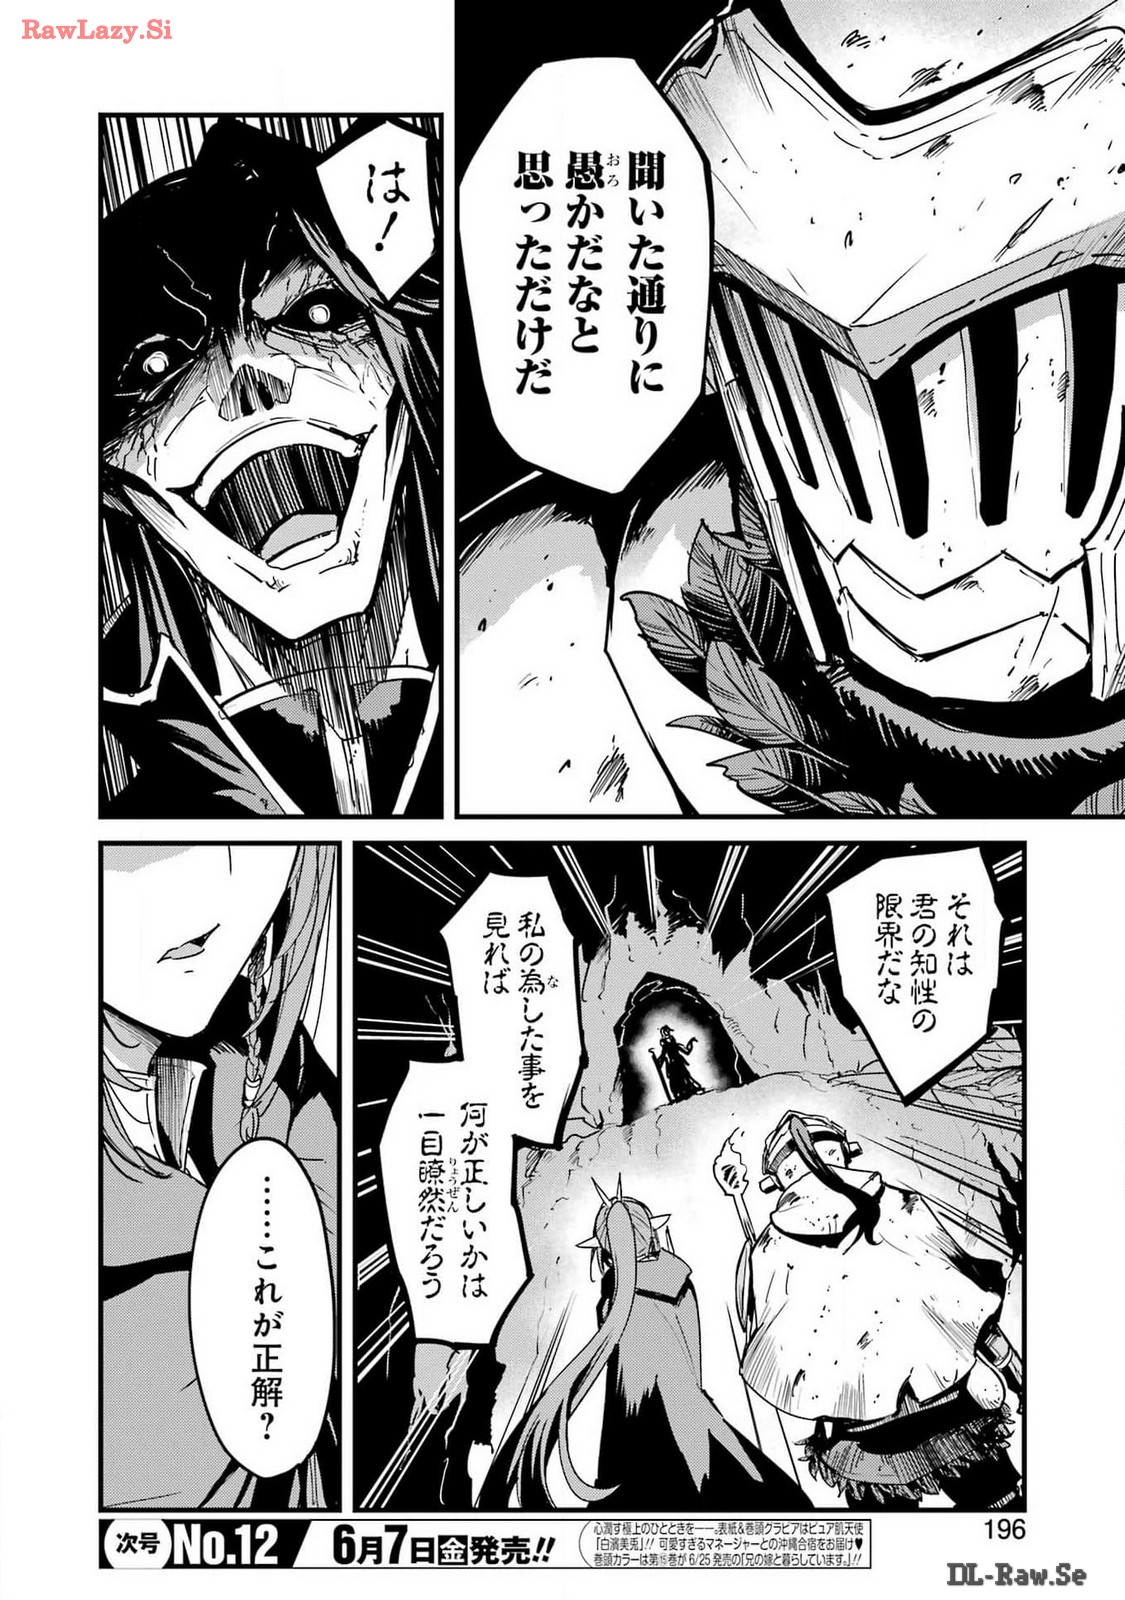 Goblin Slayer: Side Story Year One - Chapter 103 - Page 4